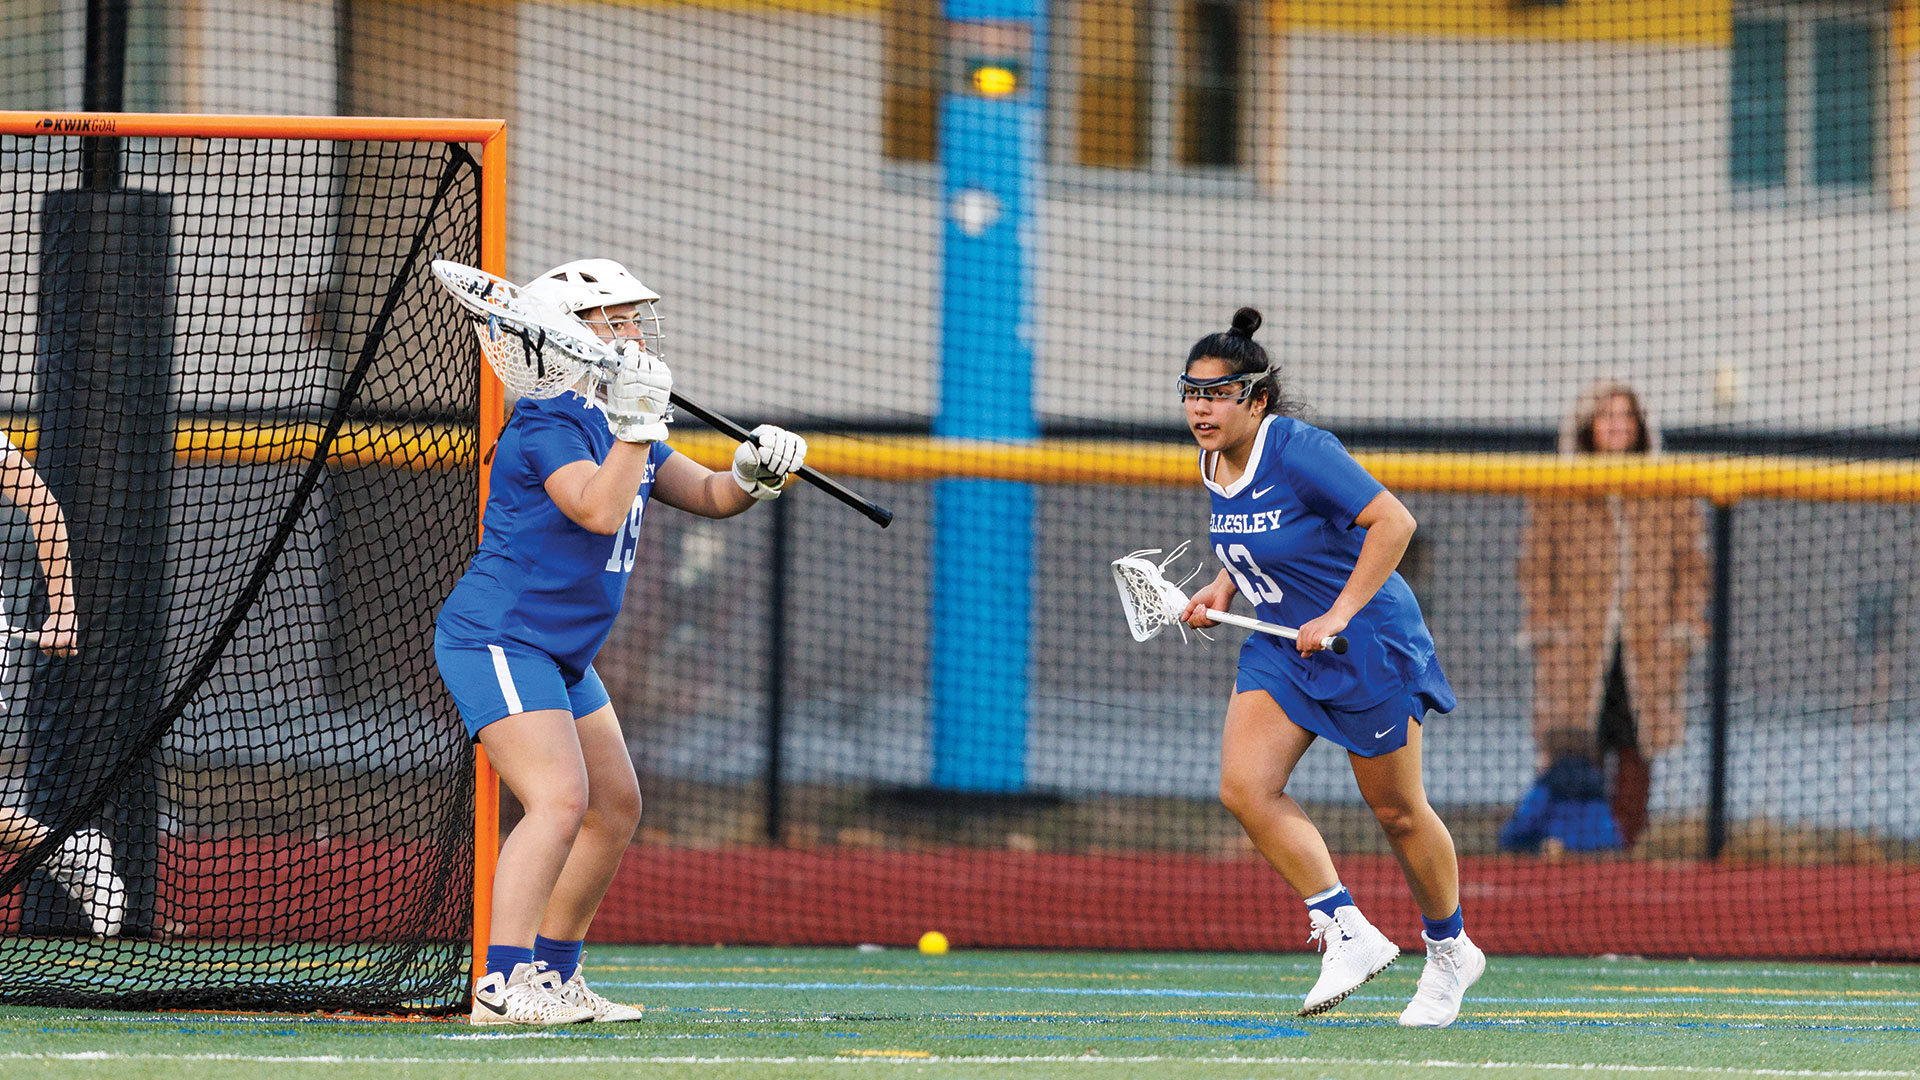 Lacrosse falls at Babson on Saturday (Frank Poulin Photography)